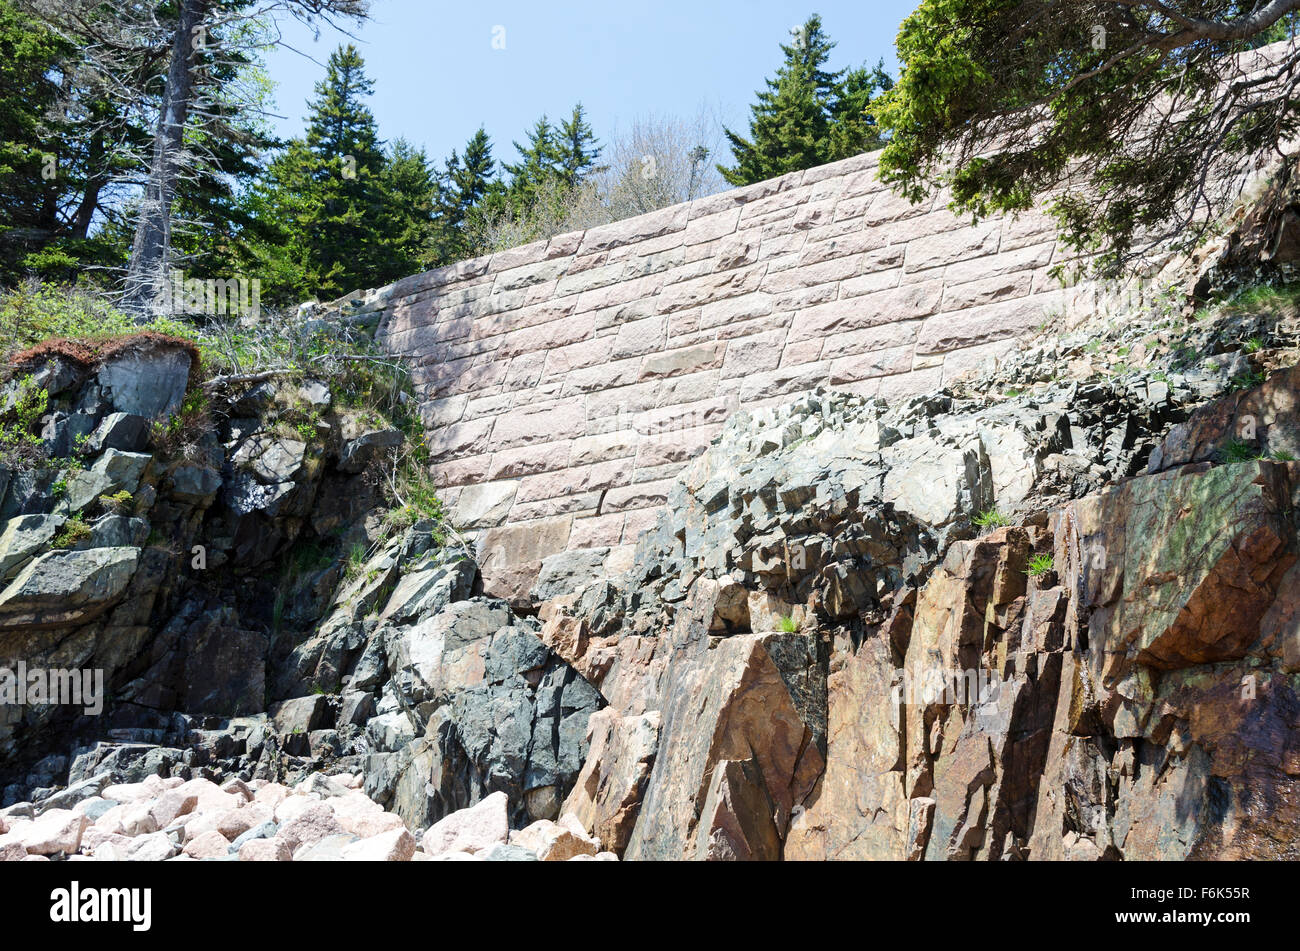 Looking up at historic stonework supporting the Park Loop Road in Acadia National Park, Maine. Stock Photo